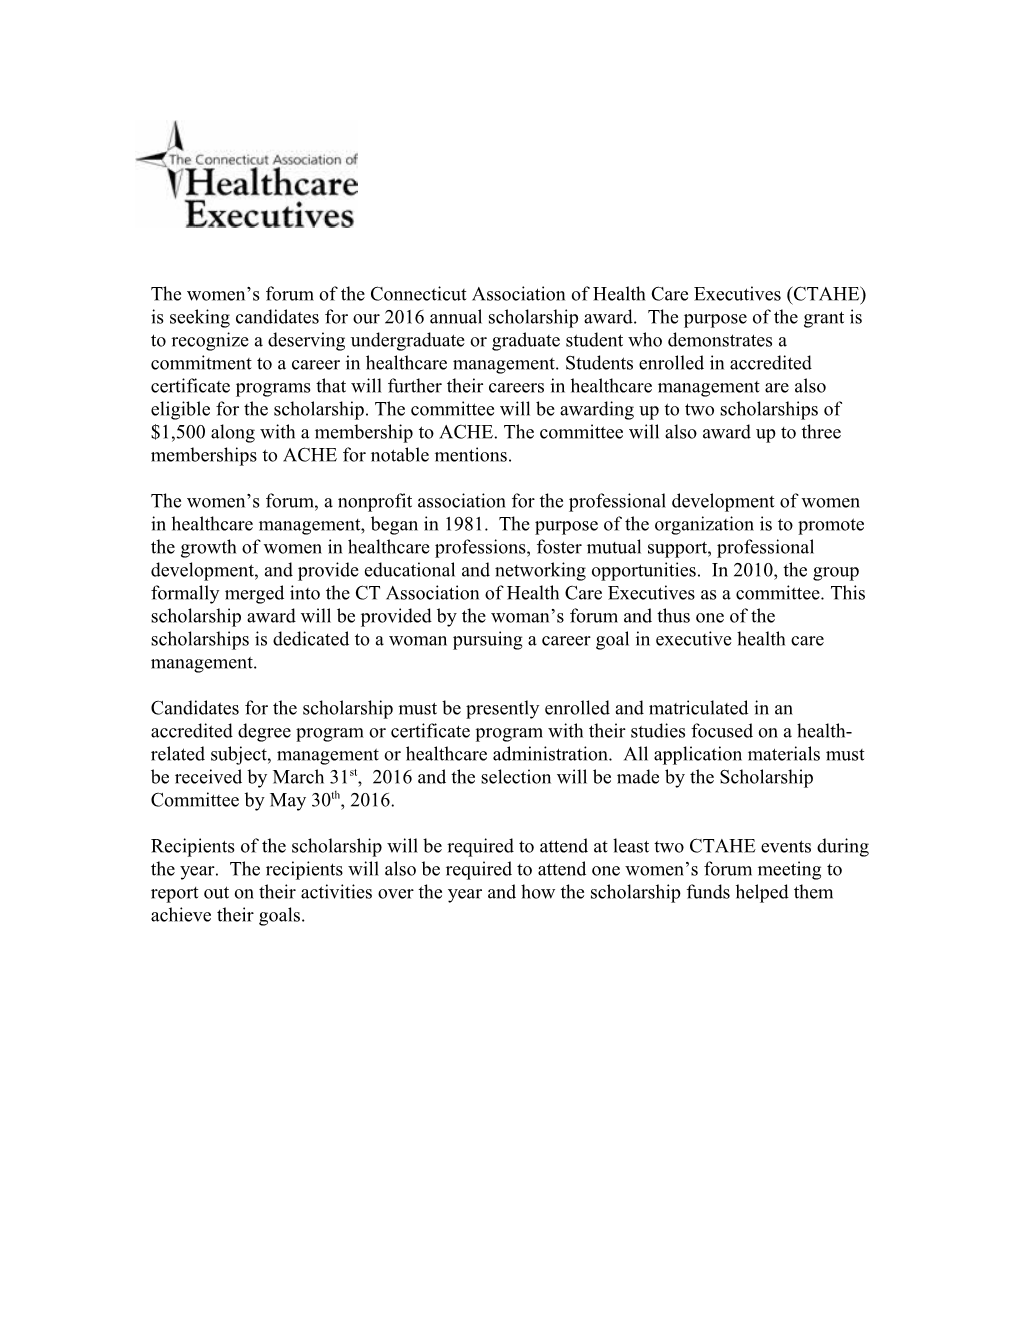 CT Women in Healthcare Management Offers Scholarship